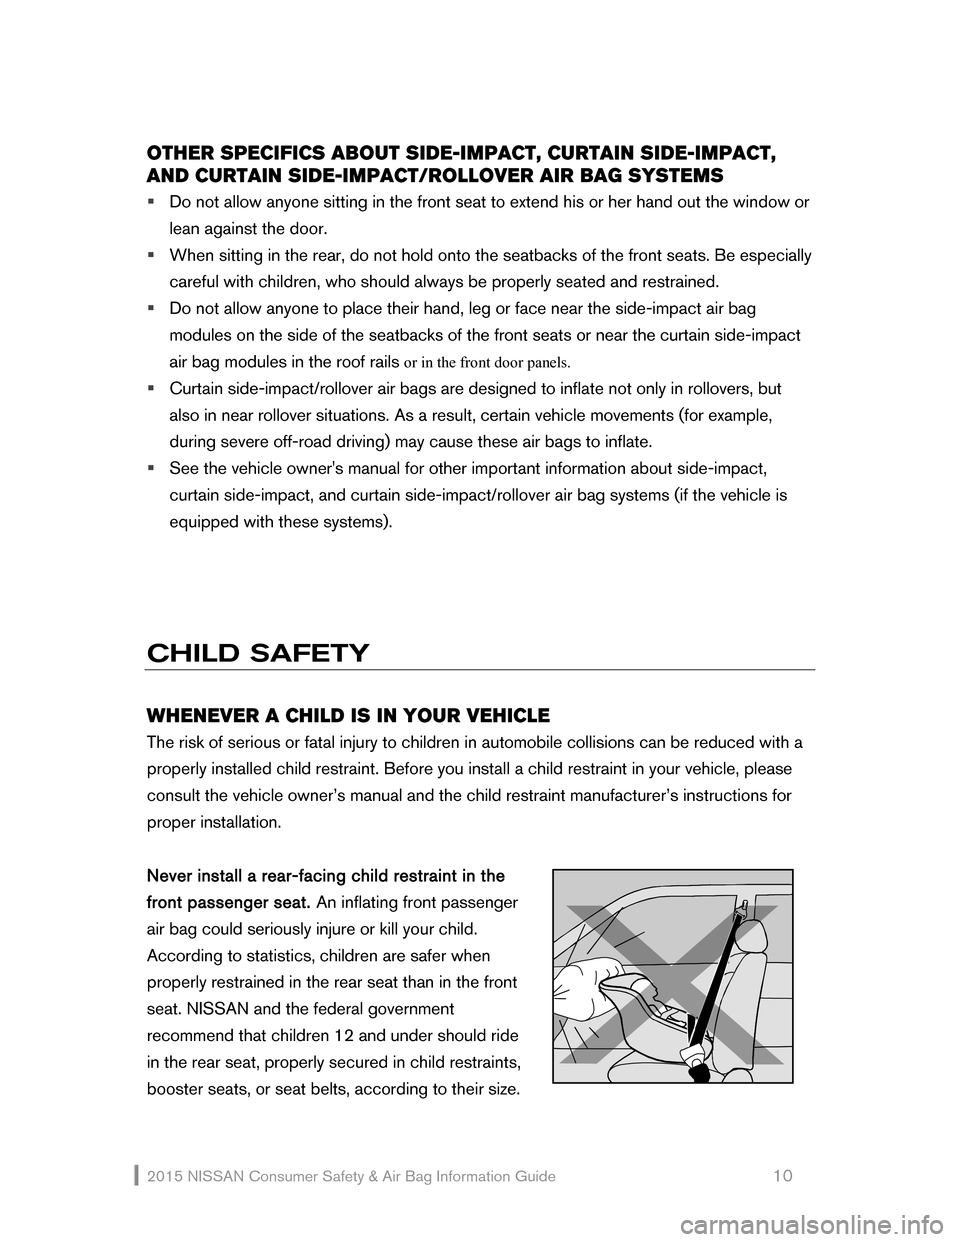 NISSAN TITAN 2015 1.G Consumer Safety Air Bag Information Guide 2015 NI\f\fAN  Consumer \fafety  & Air Bag Information Guide                                                     10 
OTHER SPE\fIFI\fS ABOUT SIDE-IMPA\fT, \fURTAIN SIDE-IMPA\fT, 
AND \fURTAIN SIDE-IMP